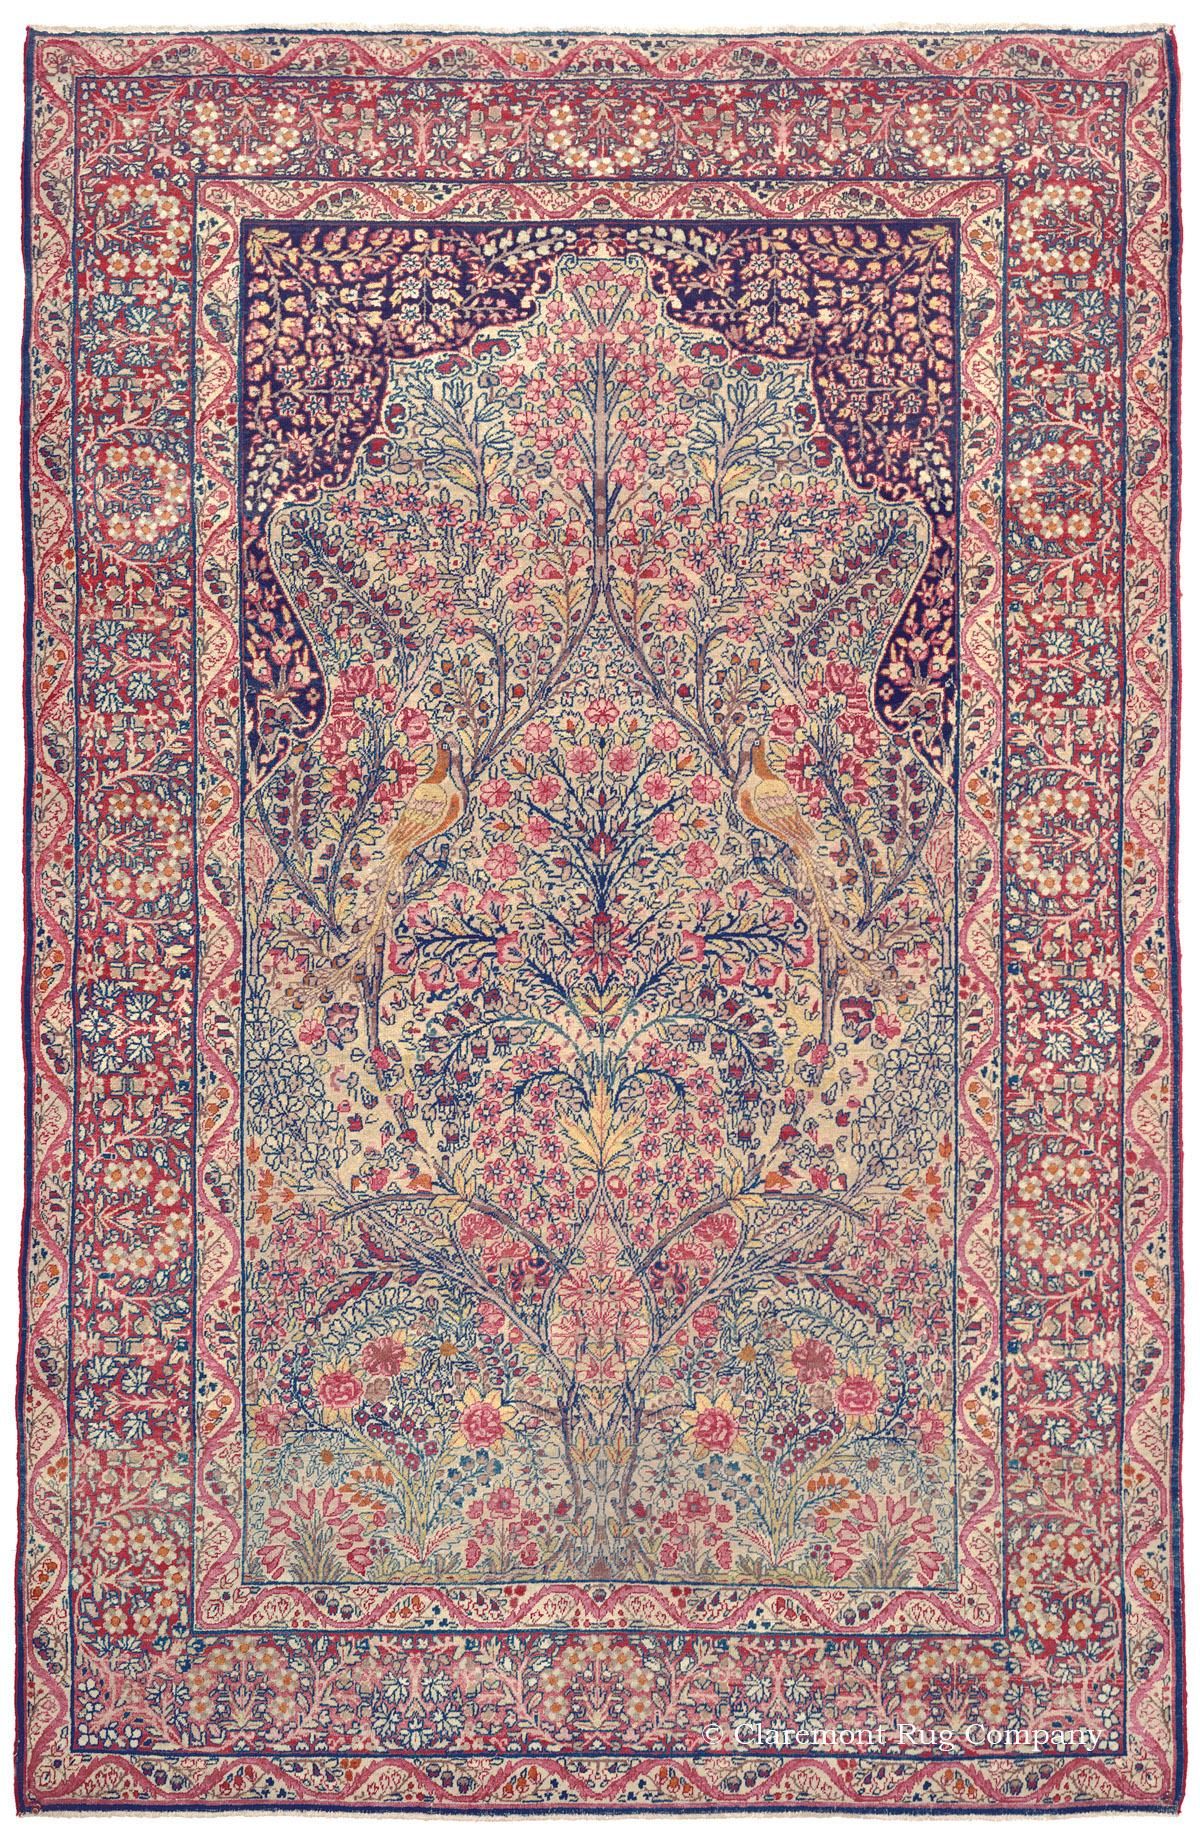 Types of antique rugs for making your
  home beautiful